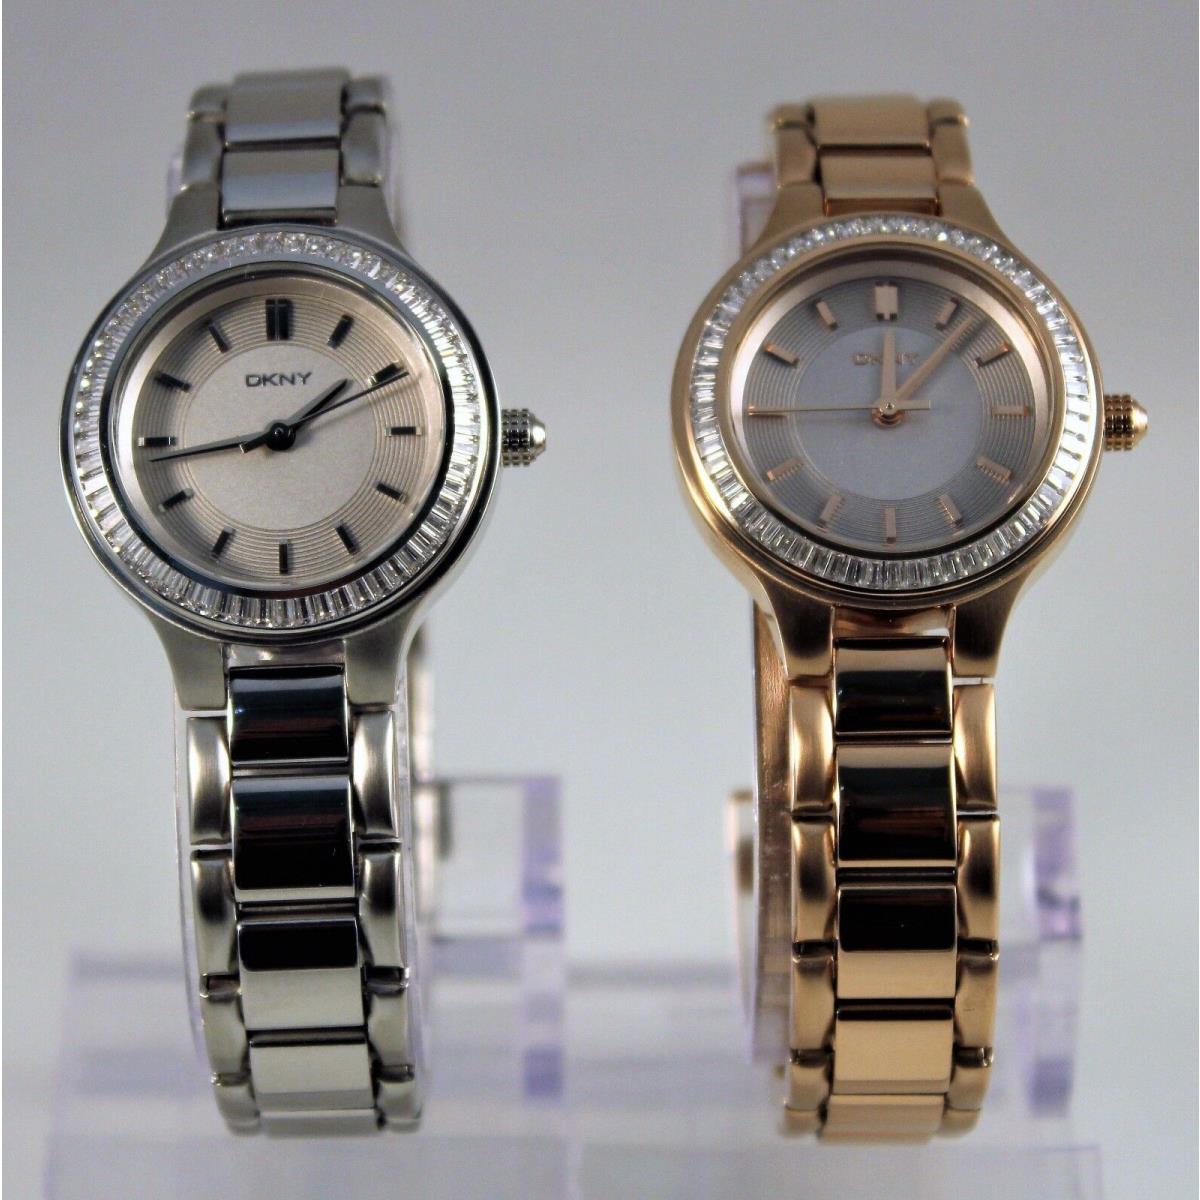 DKNY watch Chambers - Silver Face, Silver Dial